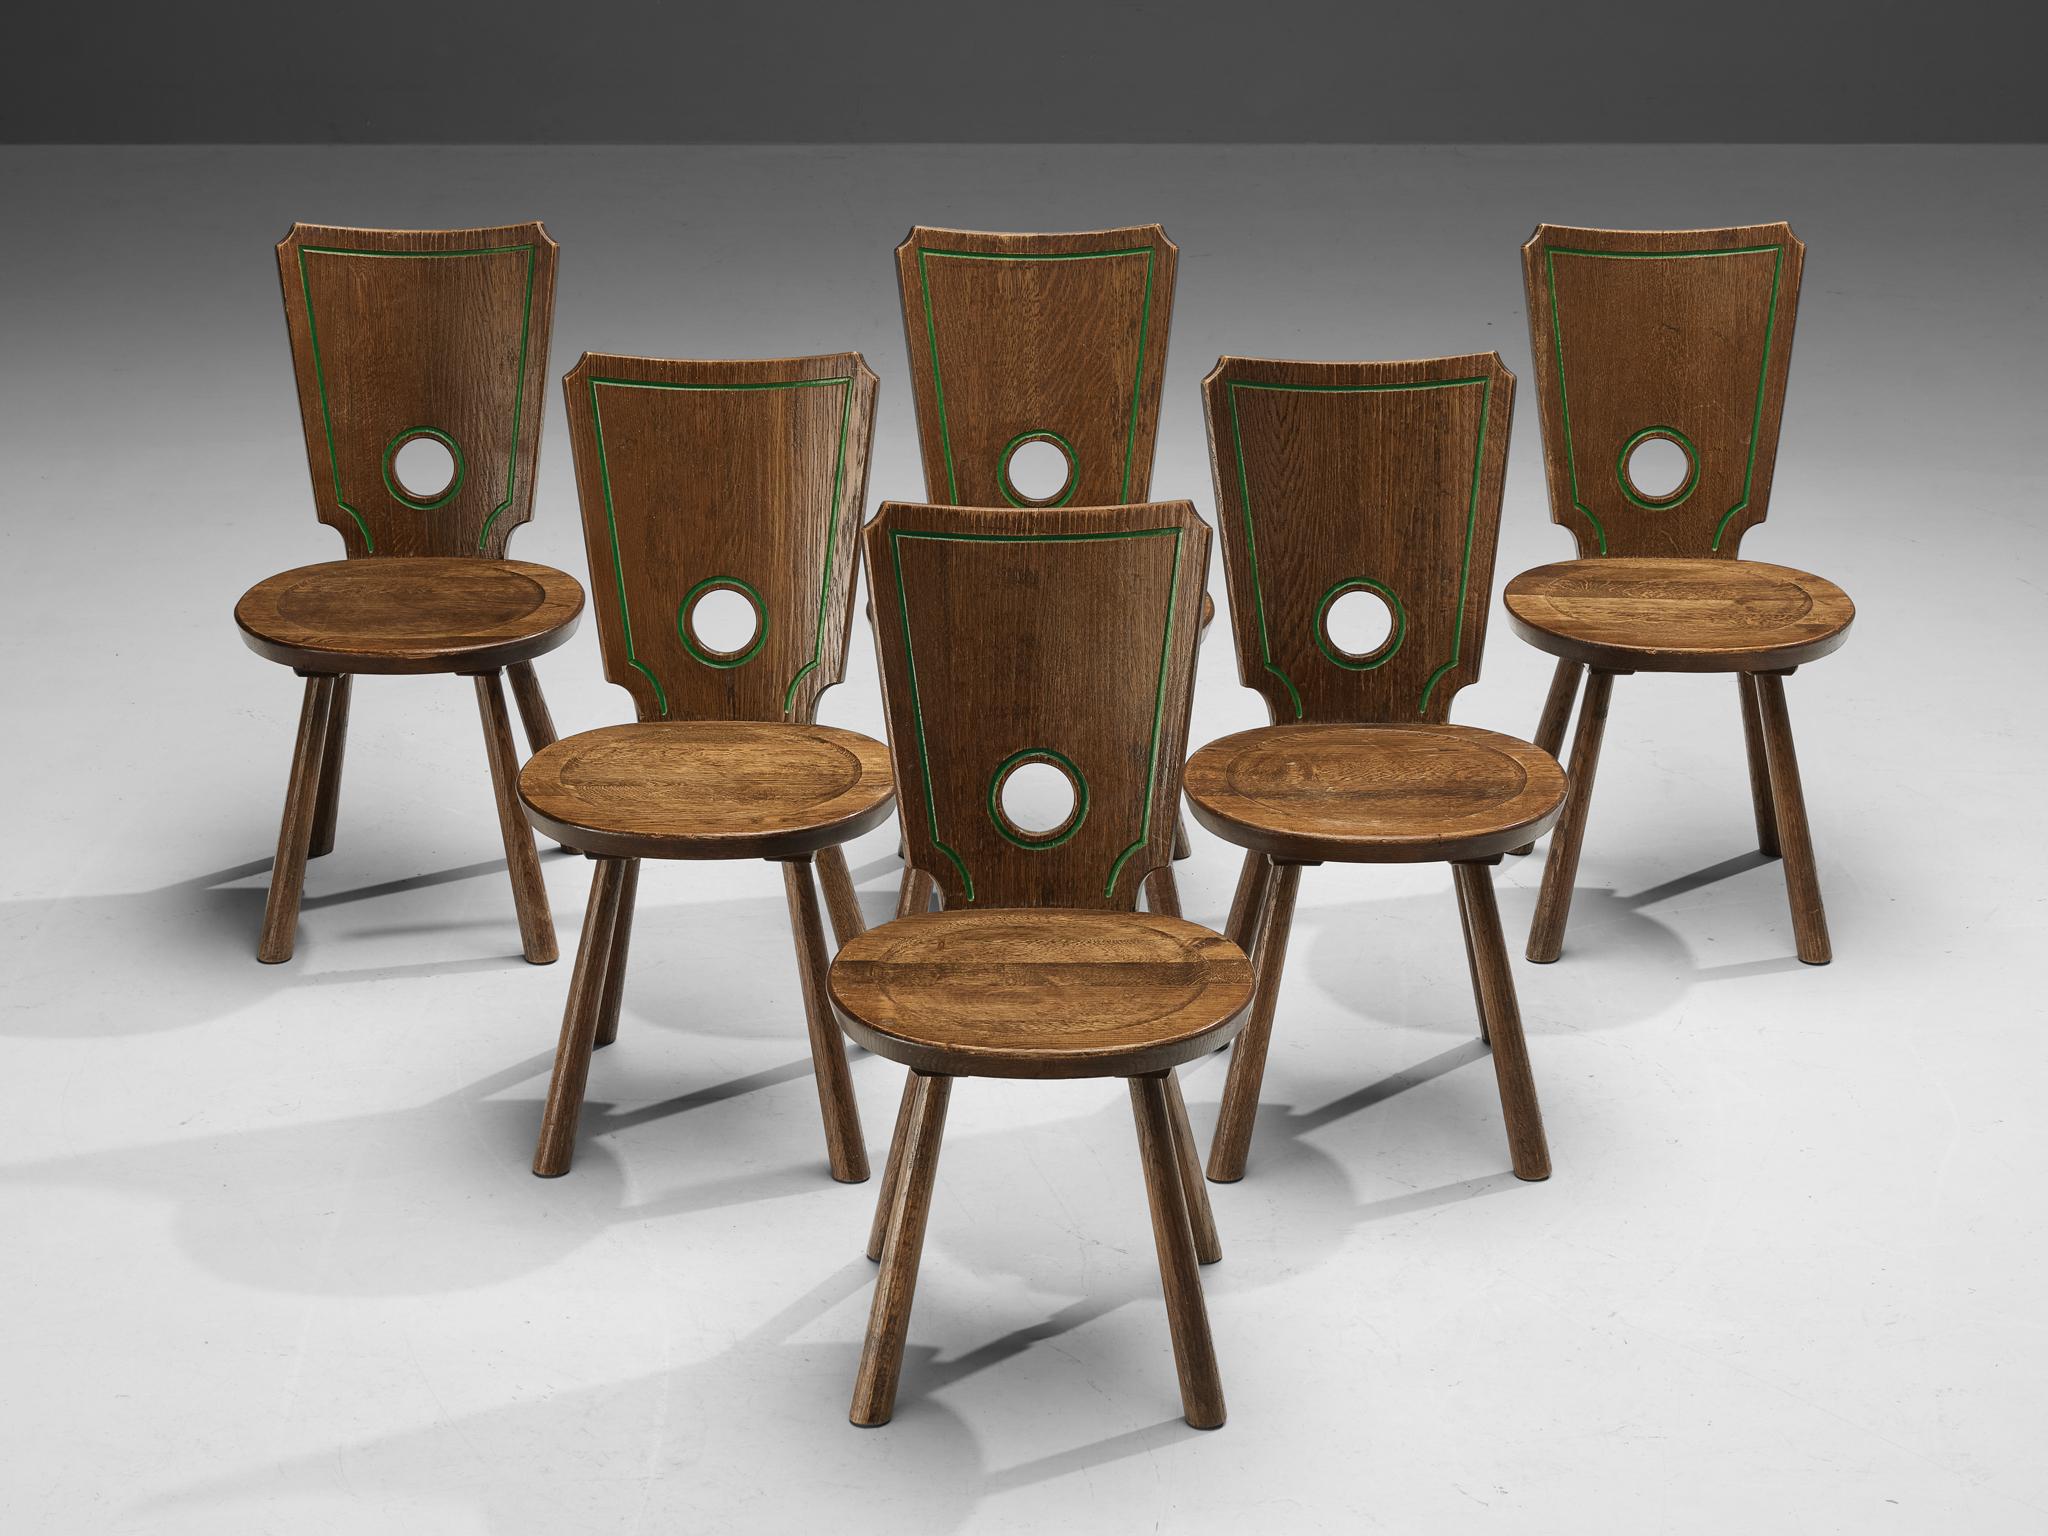 Set of six dining chairs, stained oak, brass, metal, France, 1960s

Characteristic set of six French dining chairs. Modestly decorated, the rounded gap in the backrest gets an important visual role as it contrasts with the sharp, angular lines of